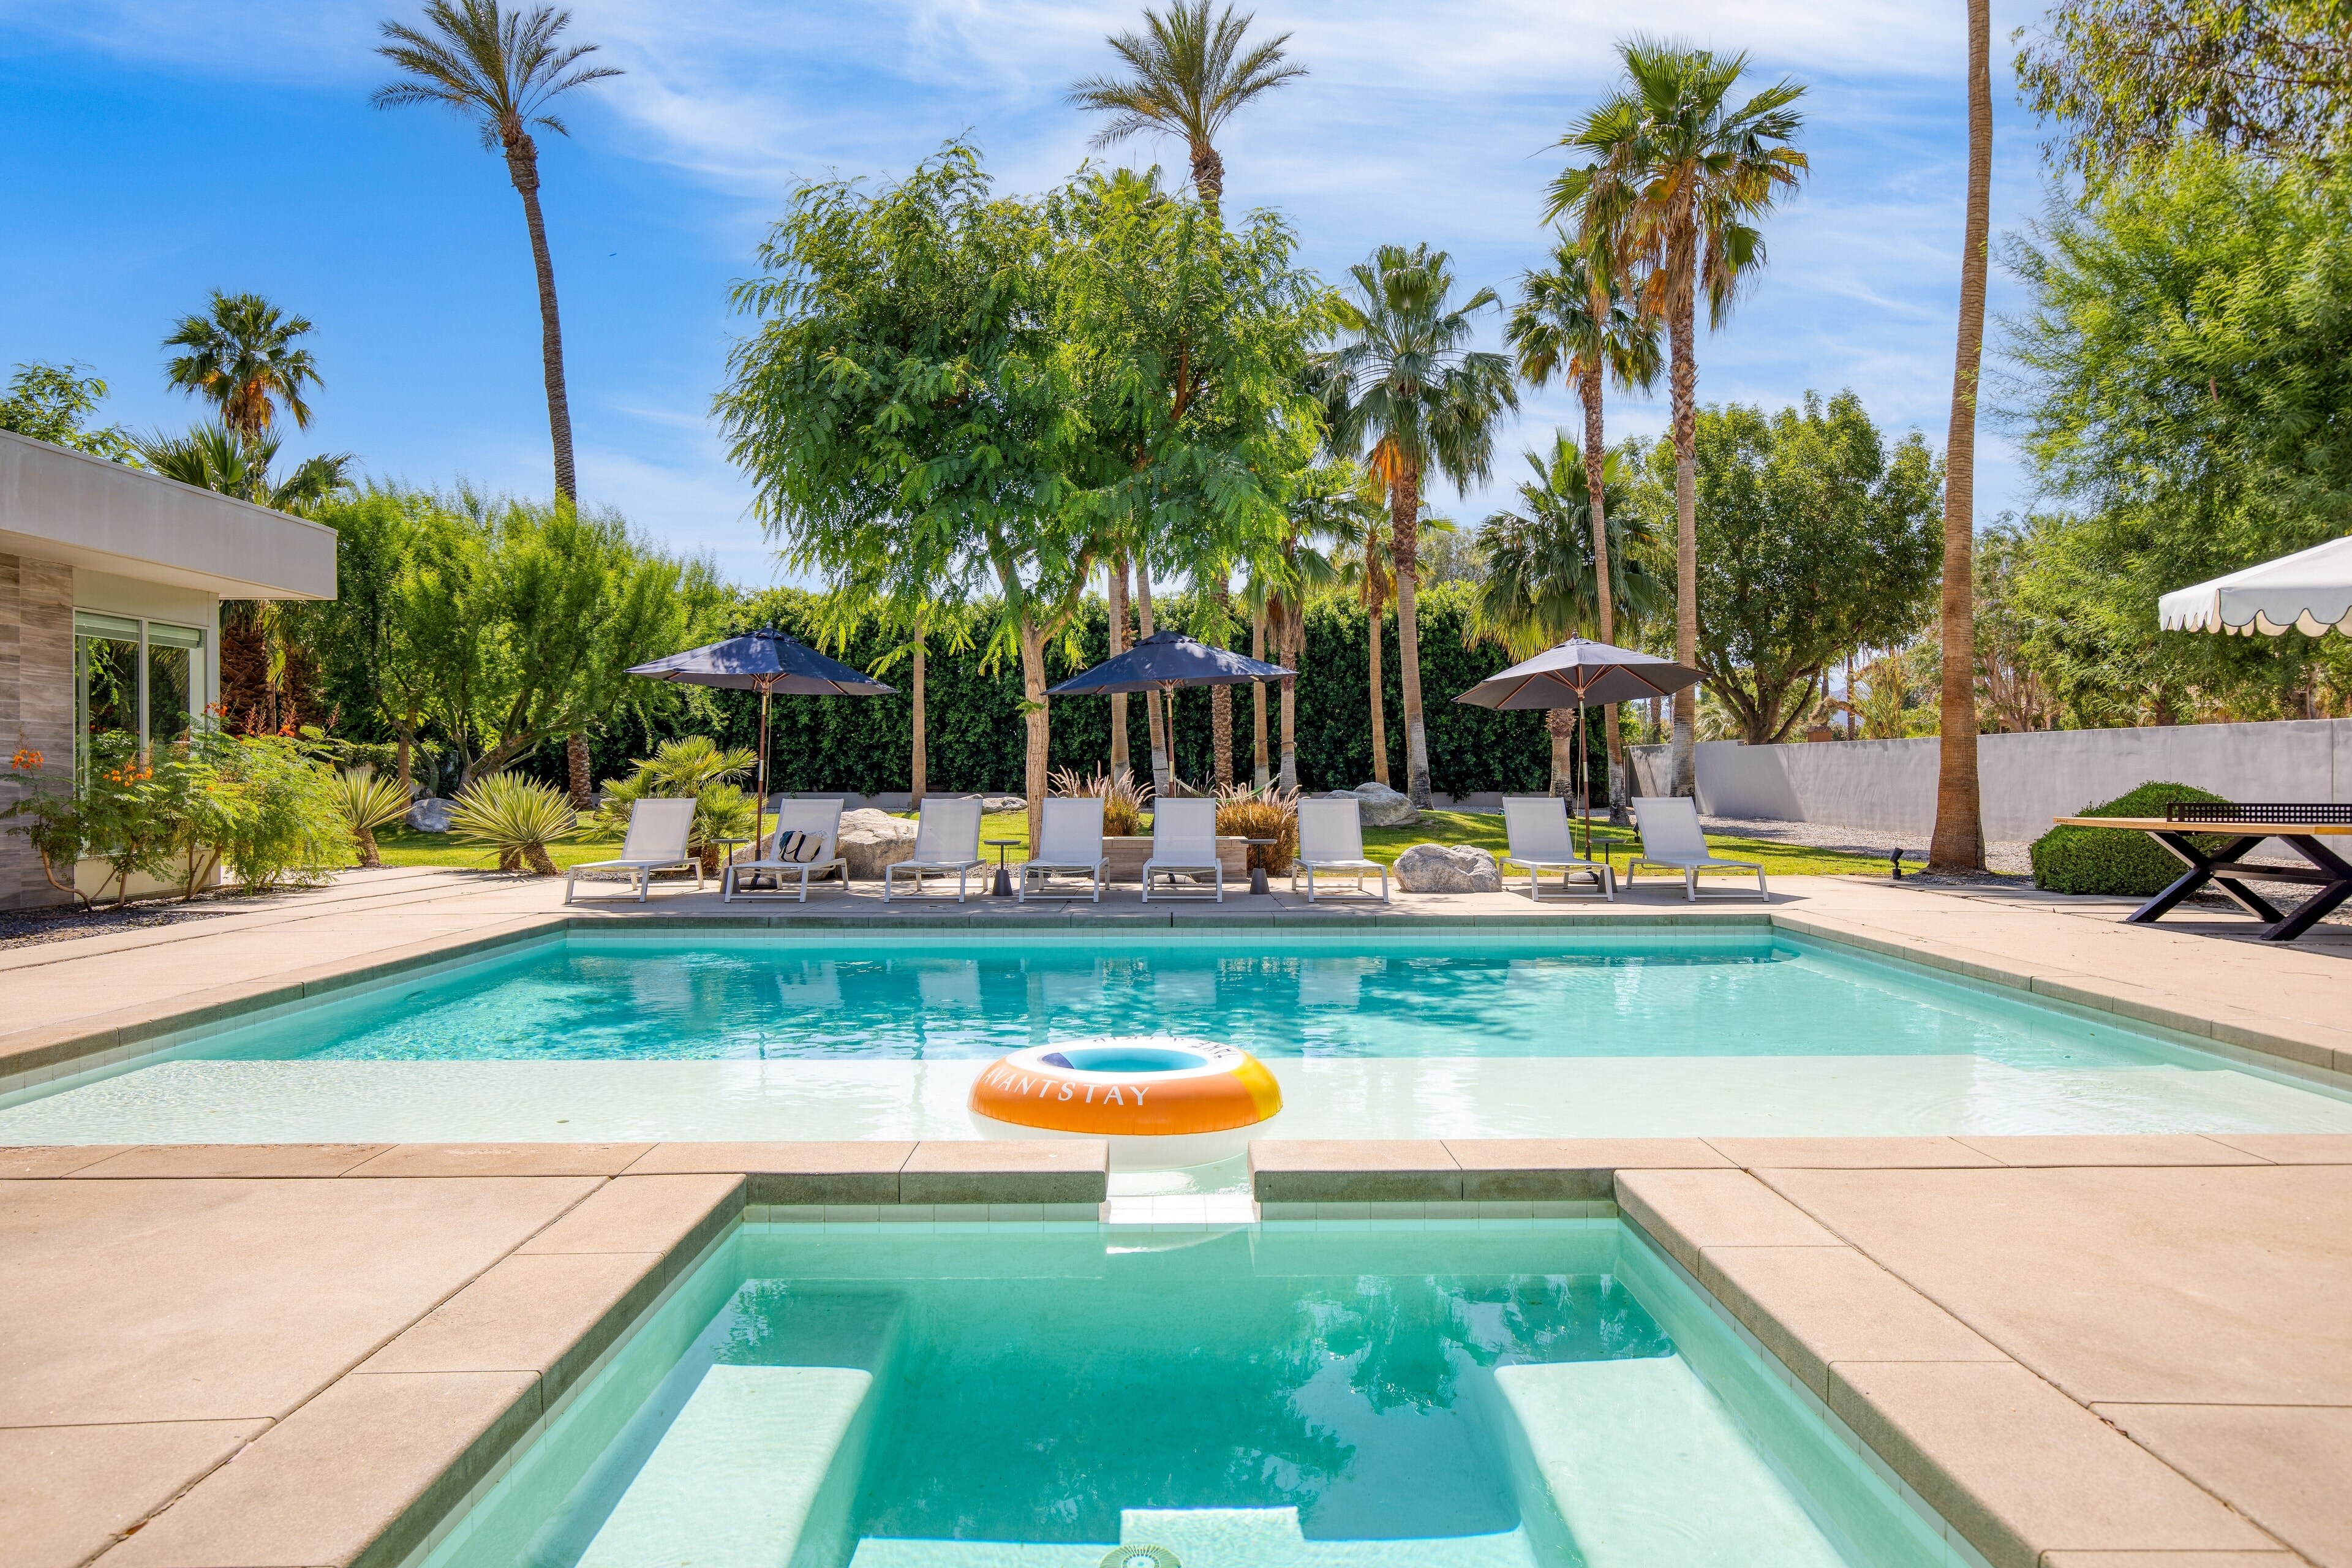 Your spacious backyard oasis features a large pool and private hot tub.